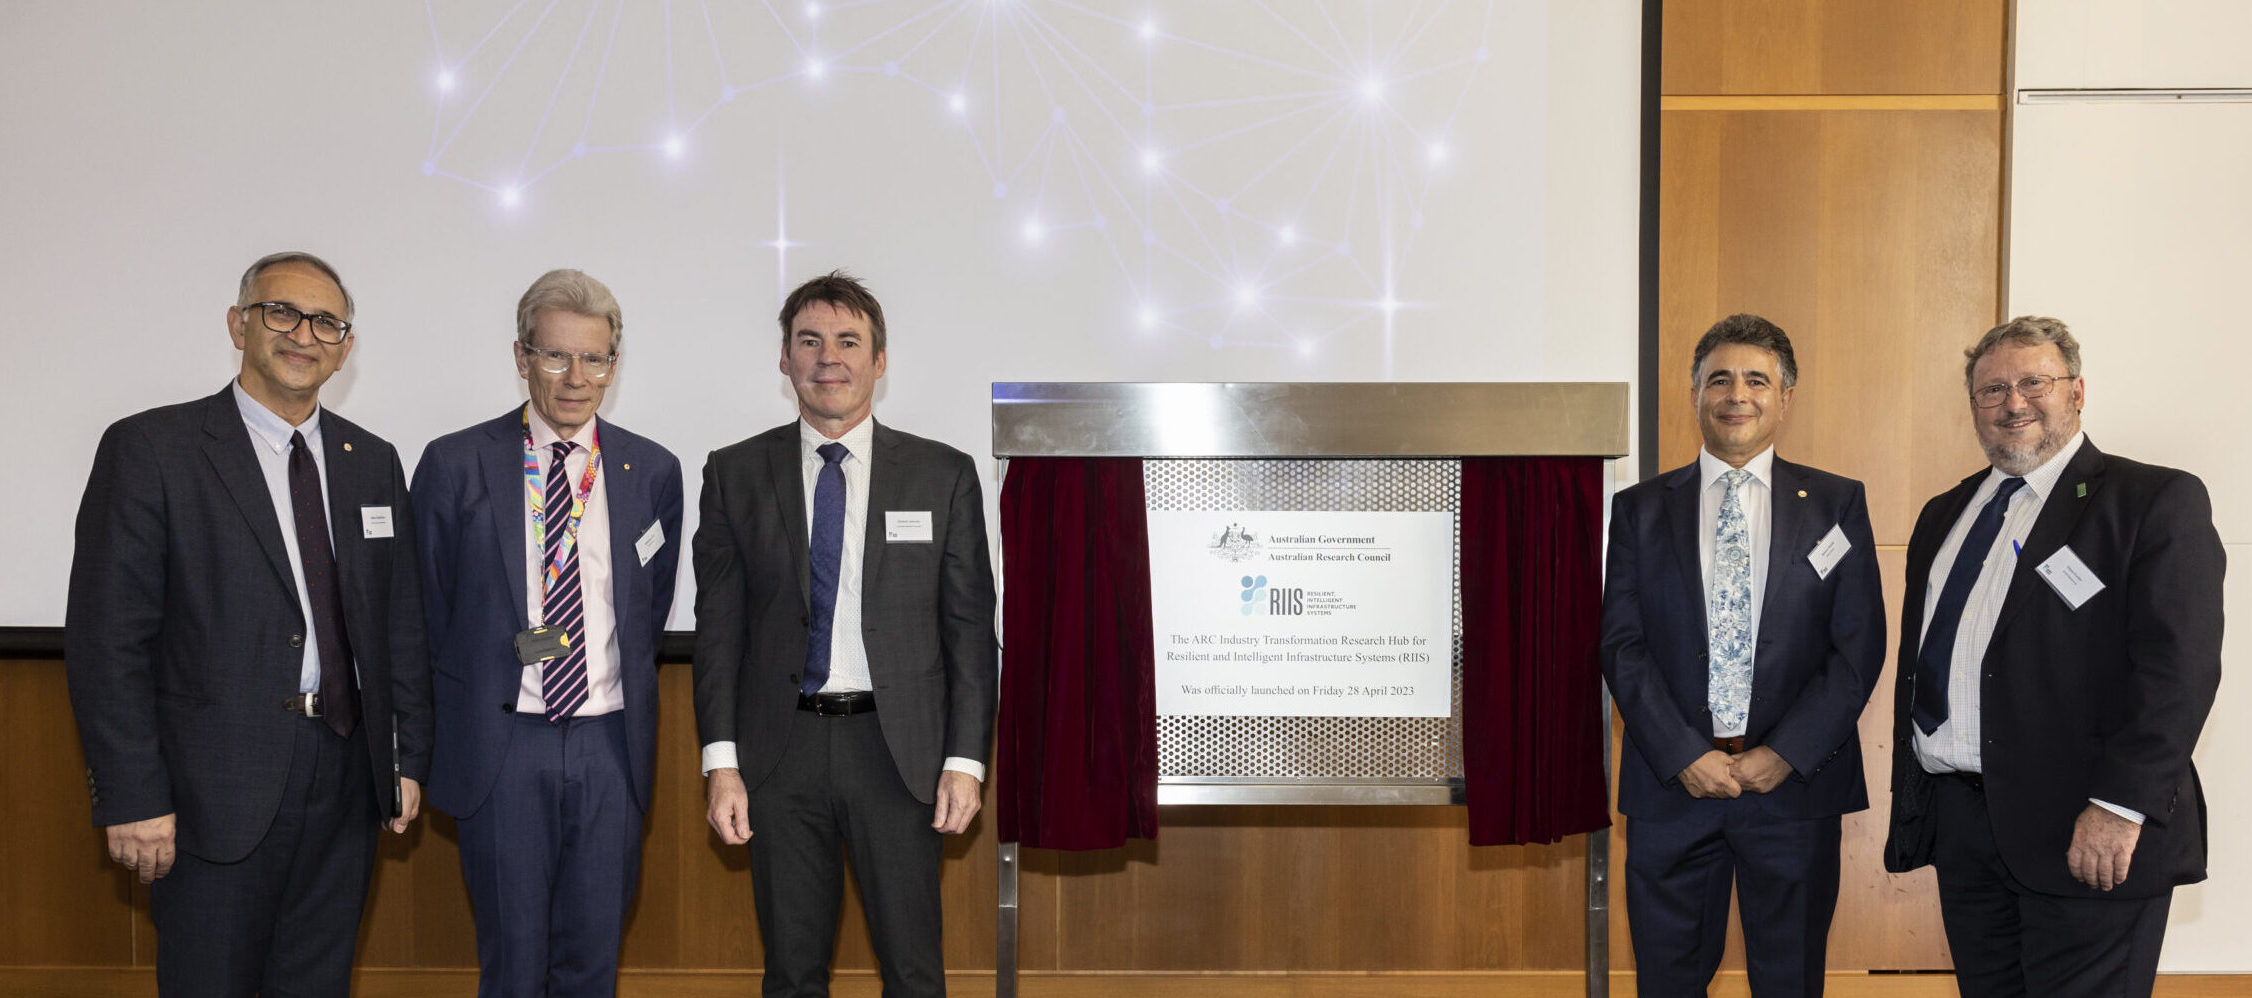 ARC Research Hub for Resilient and Intelligent Infrastructure Systems opens at UNSW Sydney